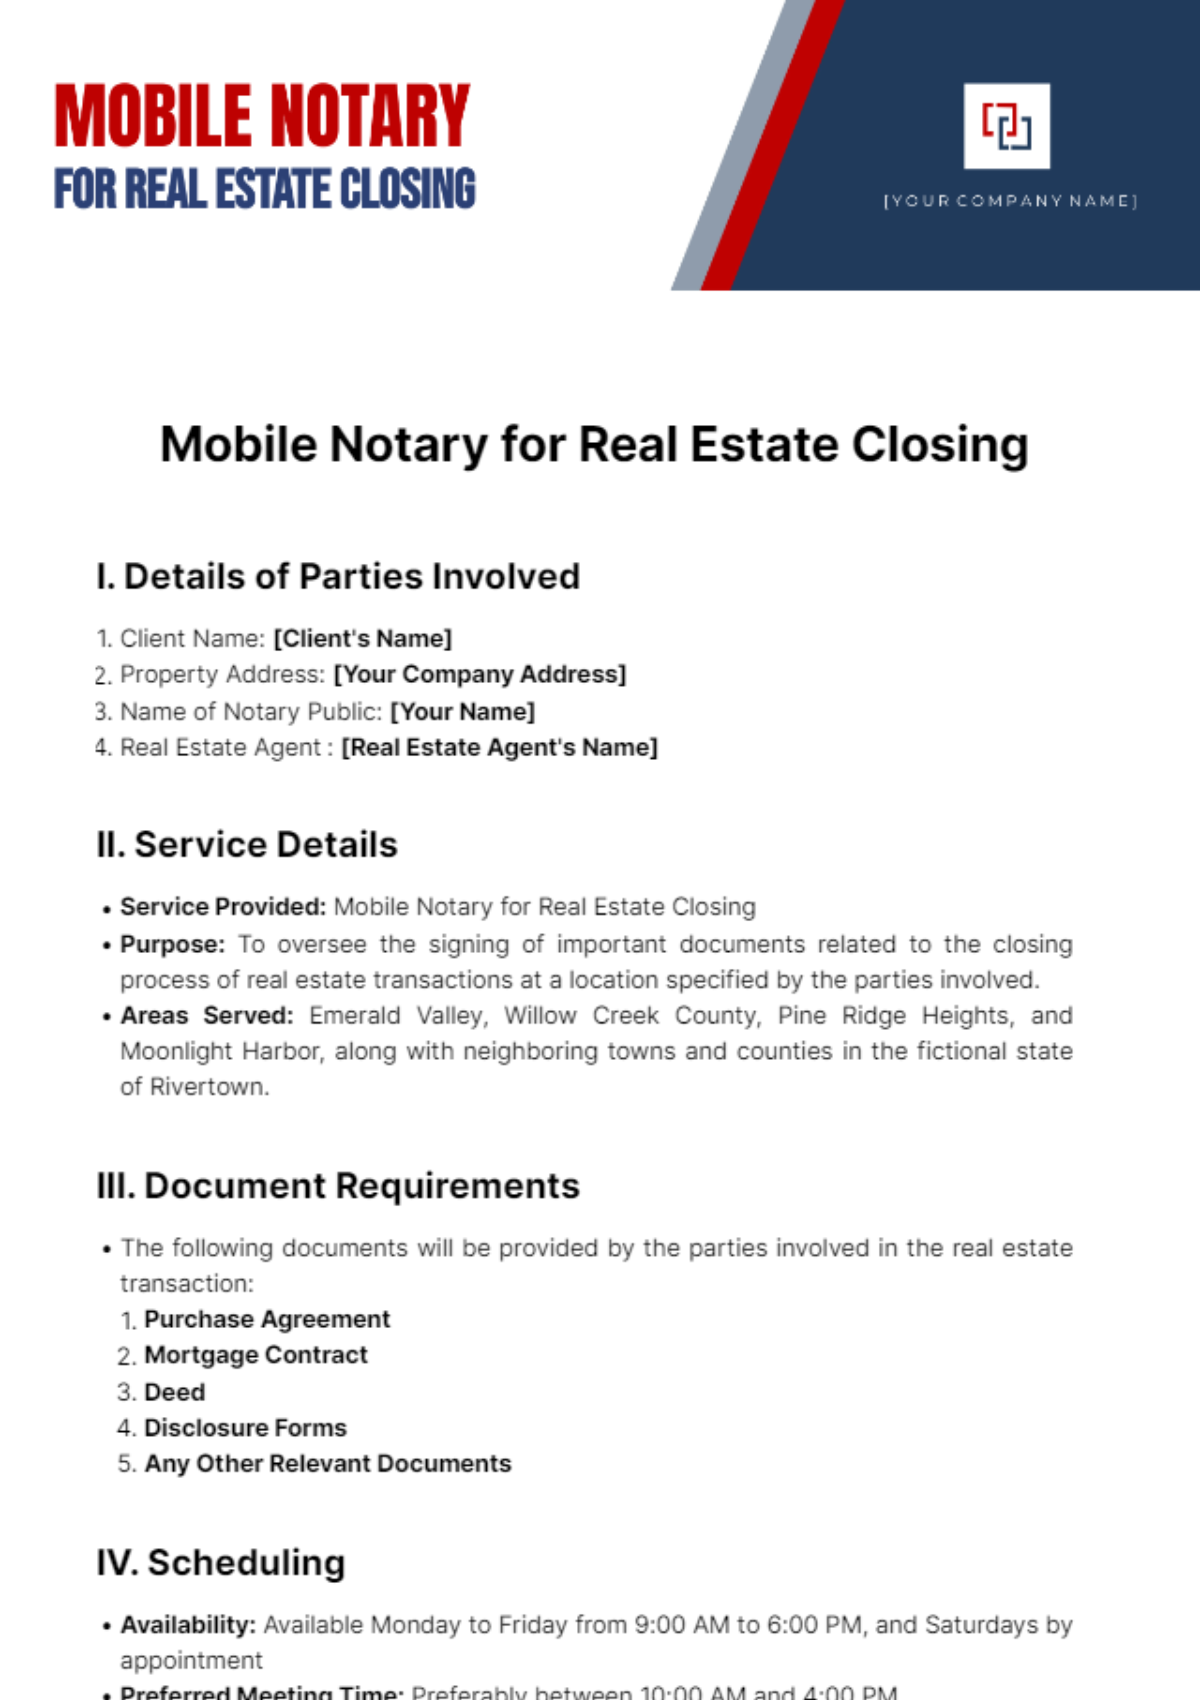 Mobile Notary for Real Estate Closing Template